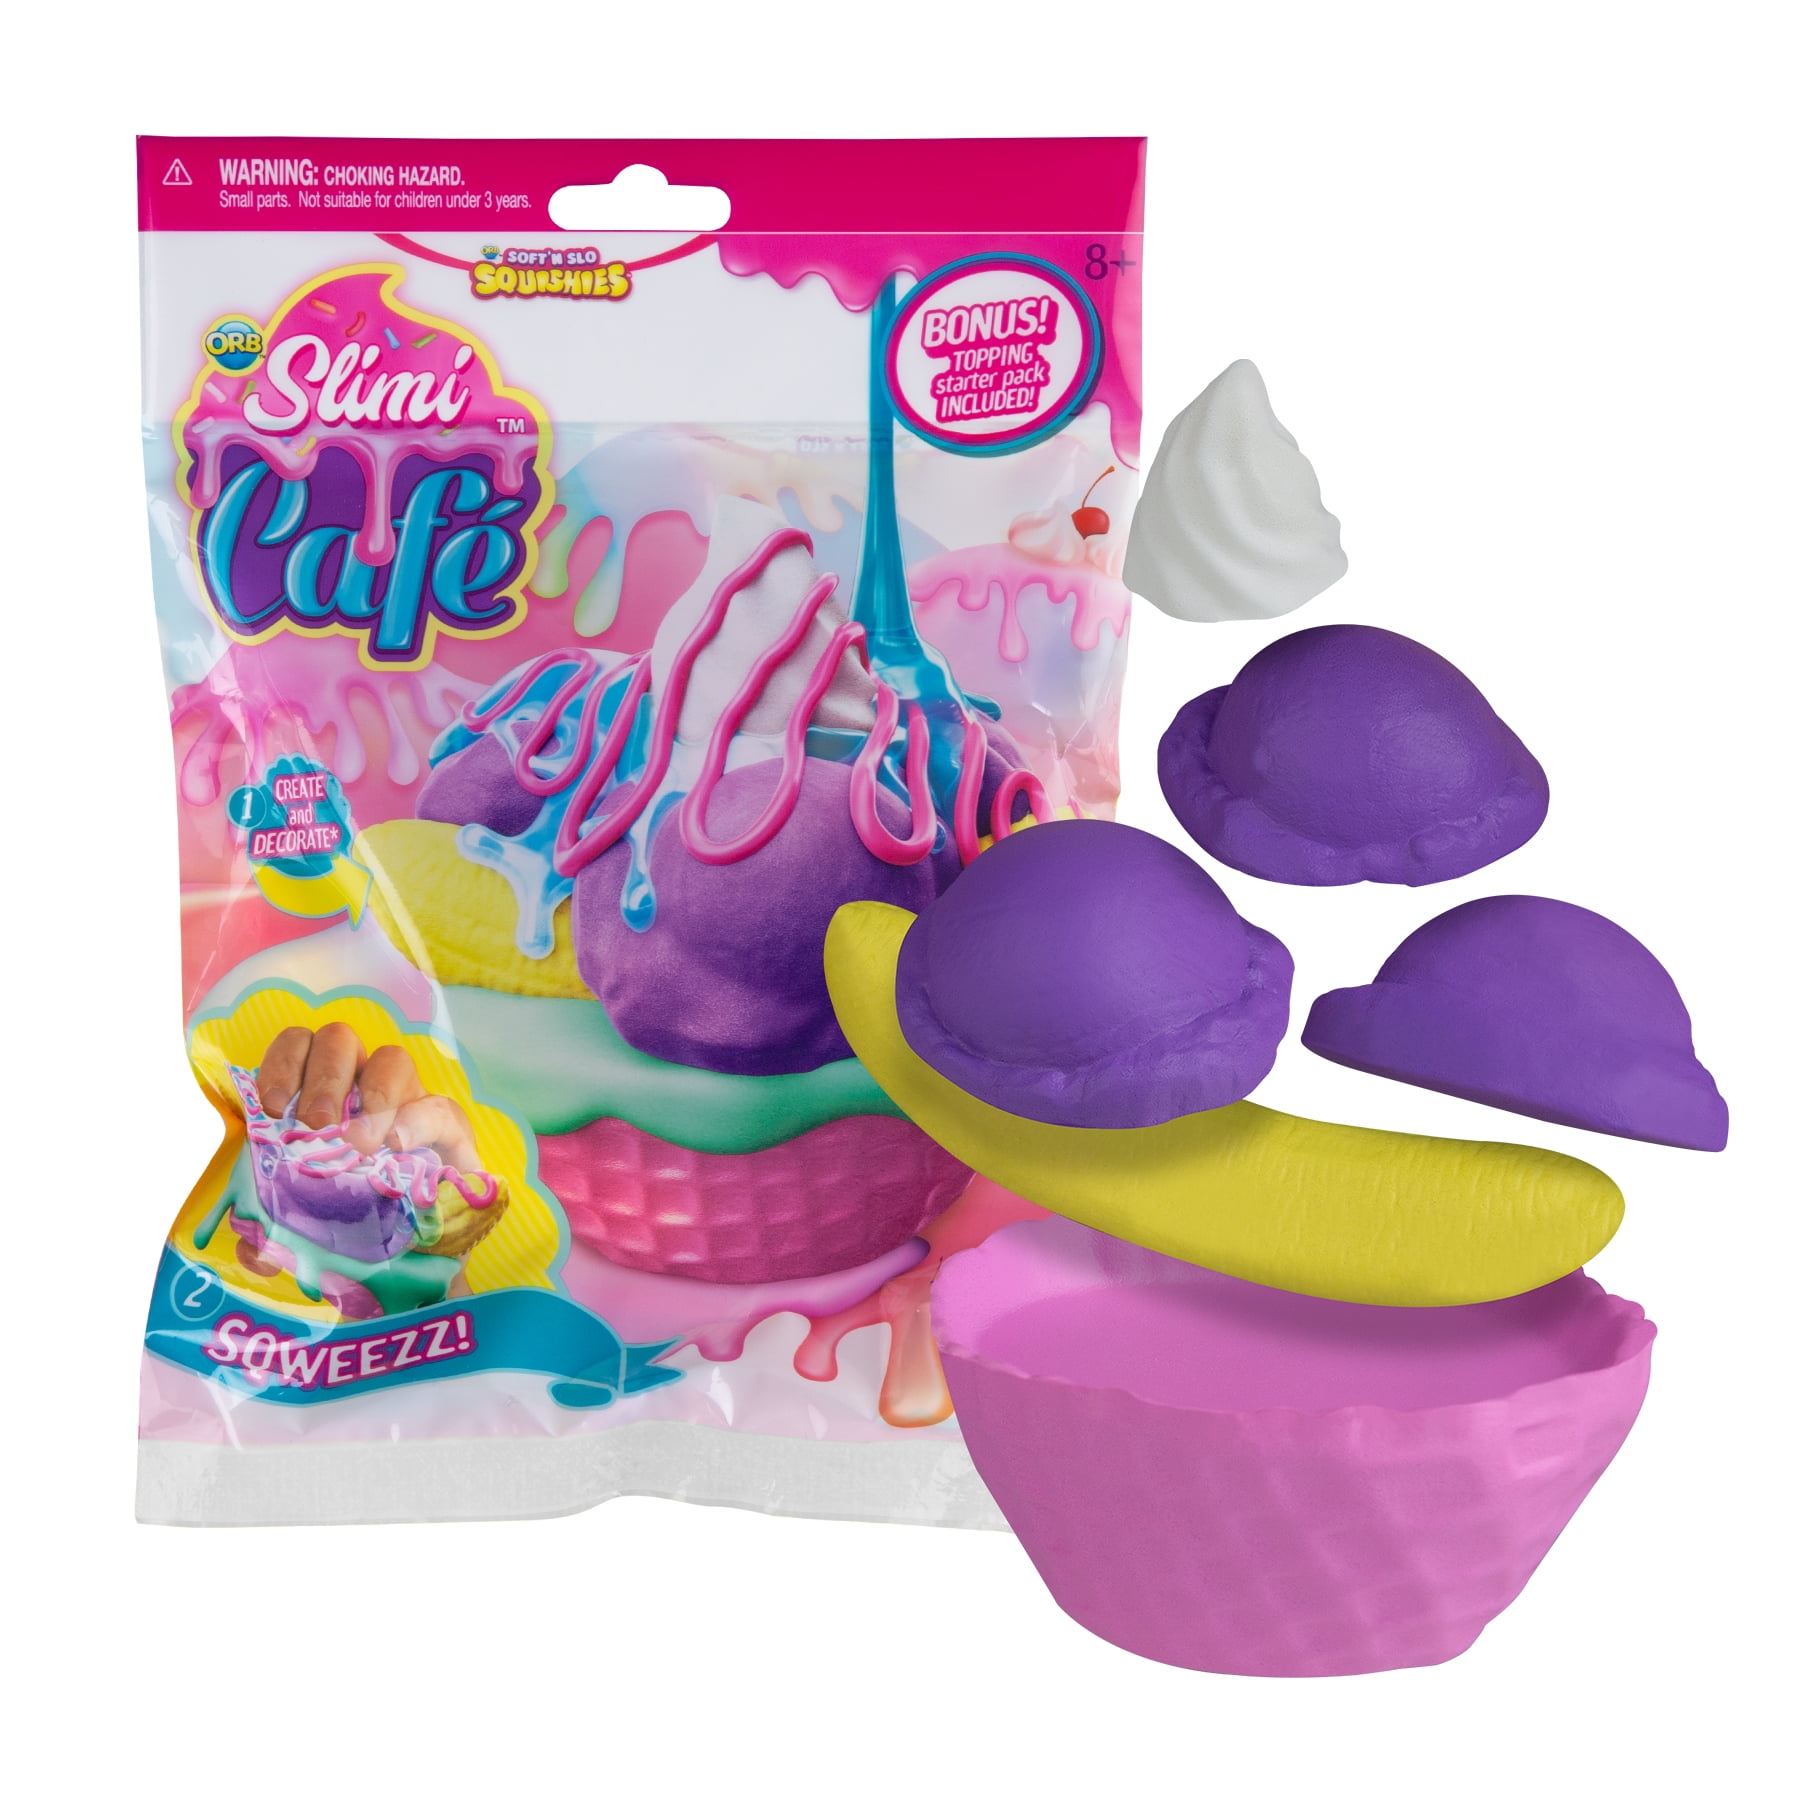 Soft' N Slo Squishies Slimi Cafe' Create & Decorate Good for Ages 8+